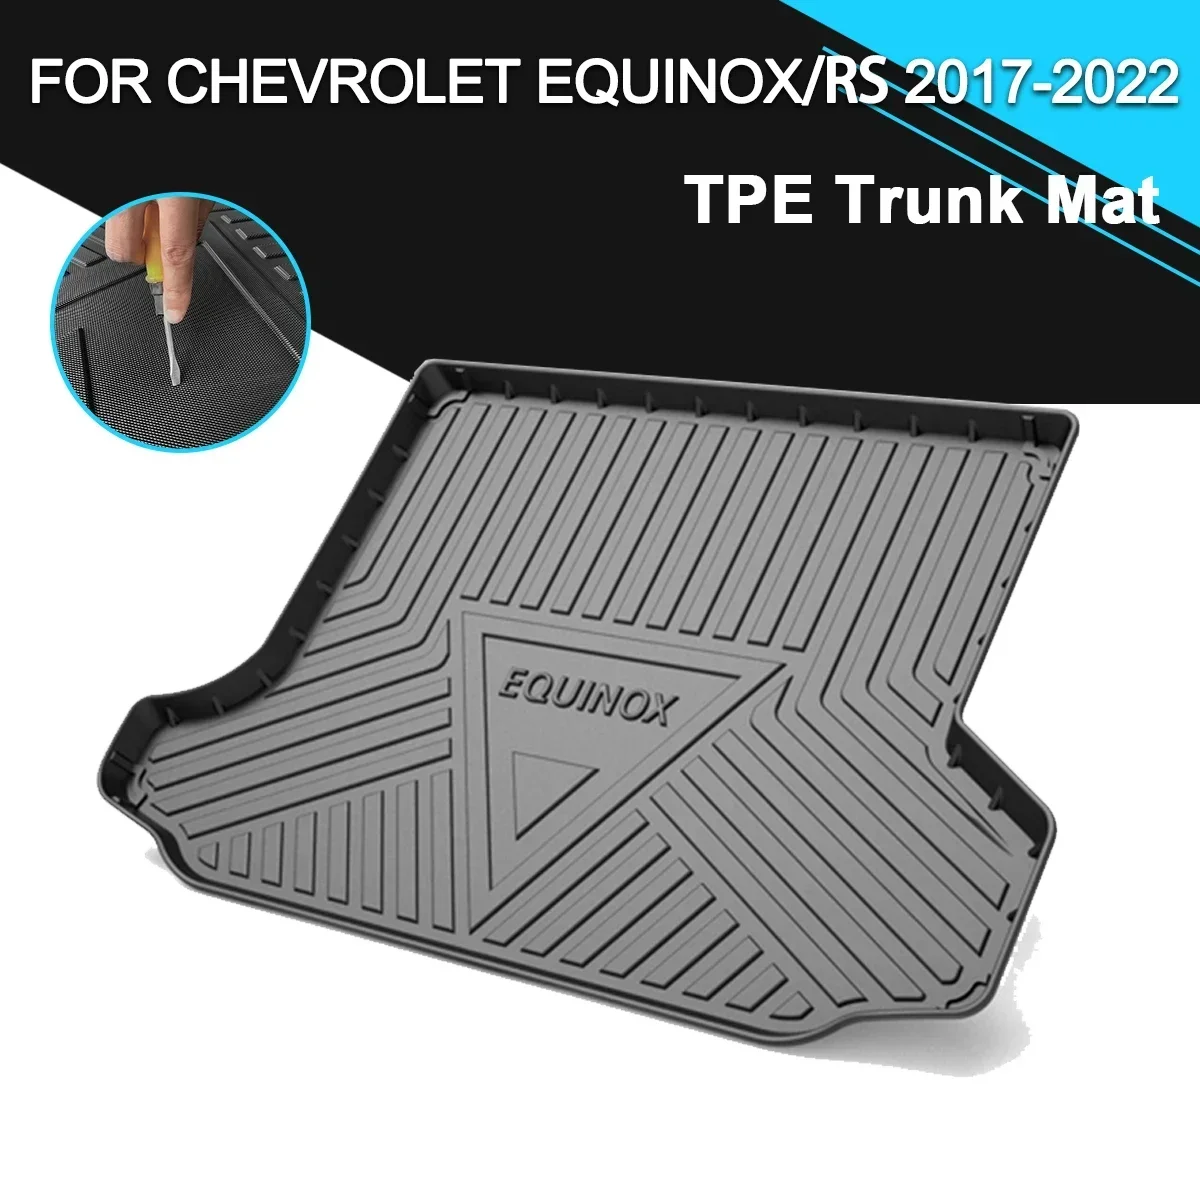 

Car Rear Trunk Cover Mat Rubber TPE Waterproof Non-Slip Cargo Liner Accessories For Chevrolet Equinox/RS 2017-2022